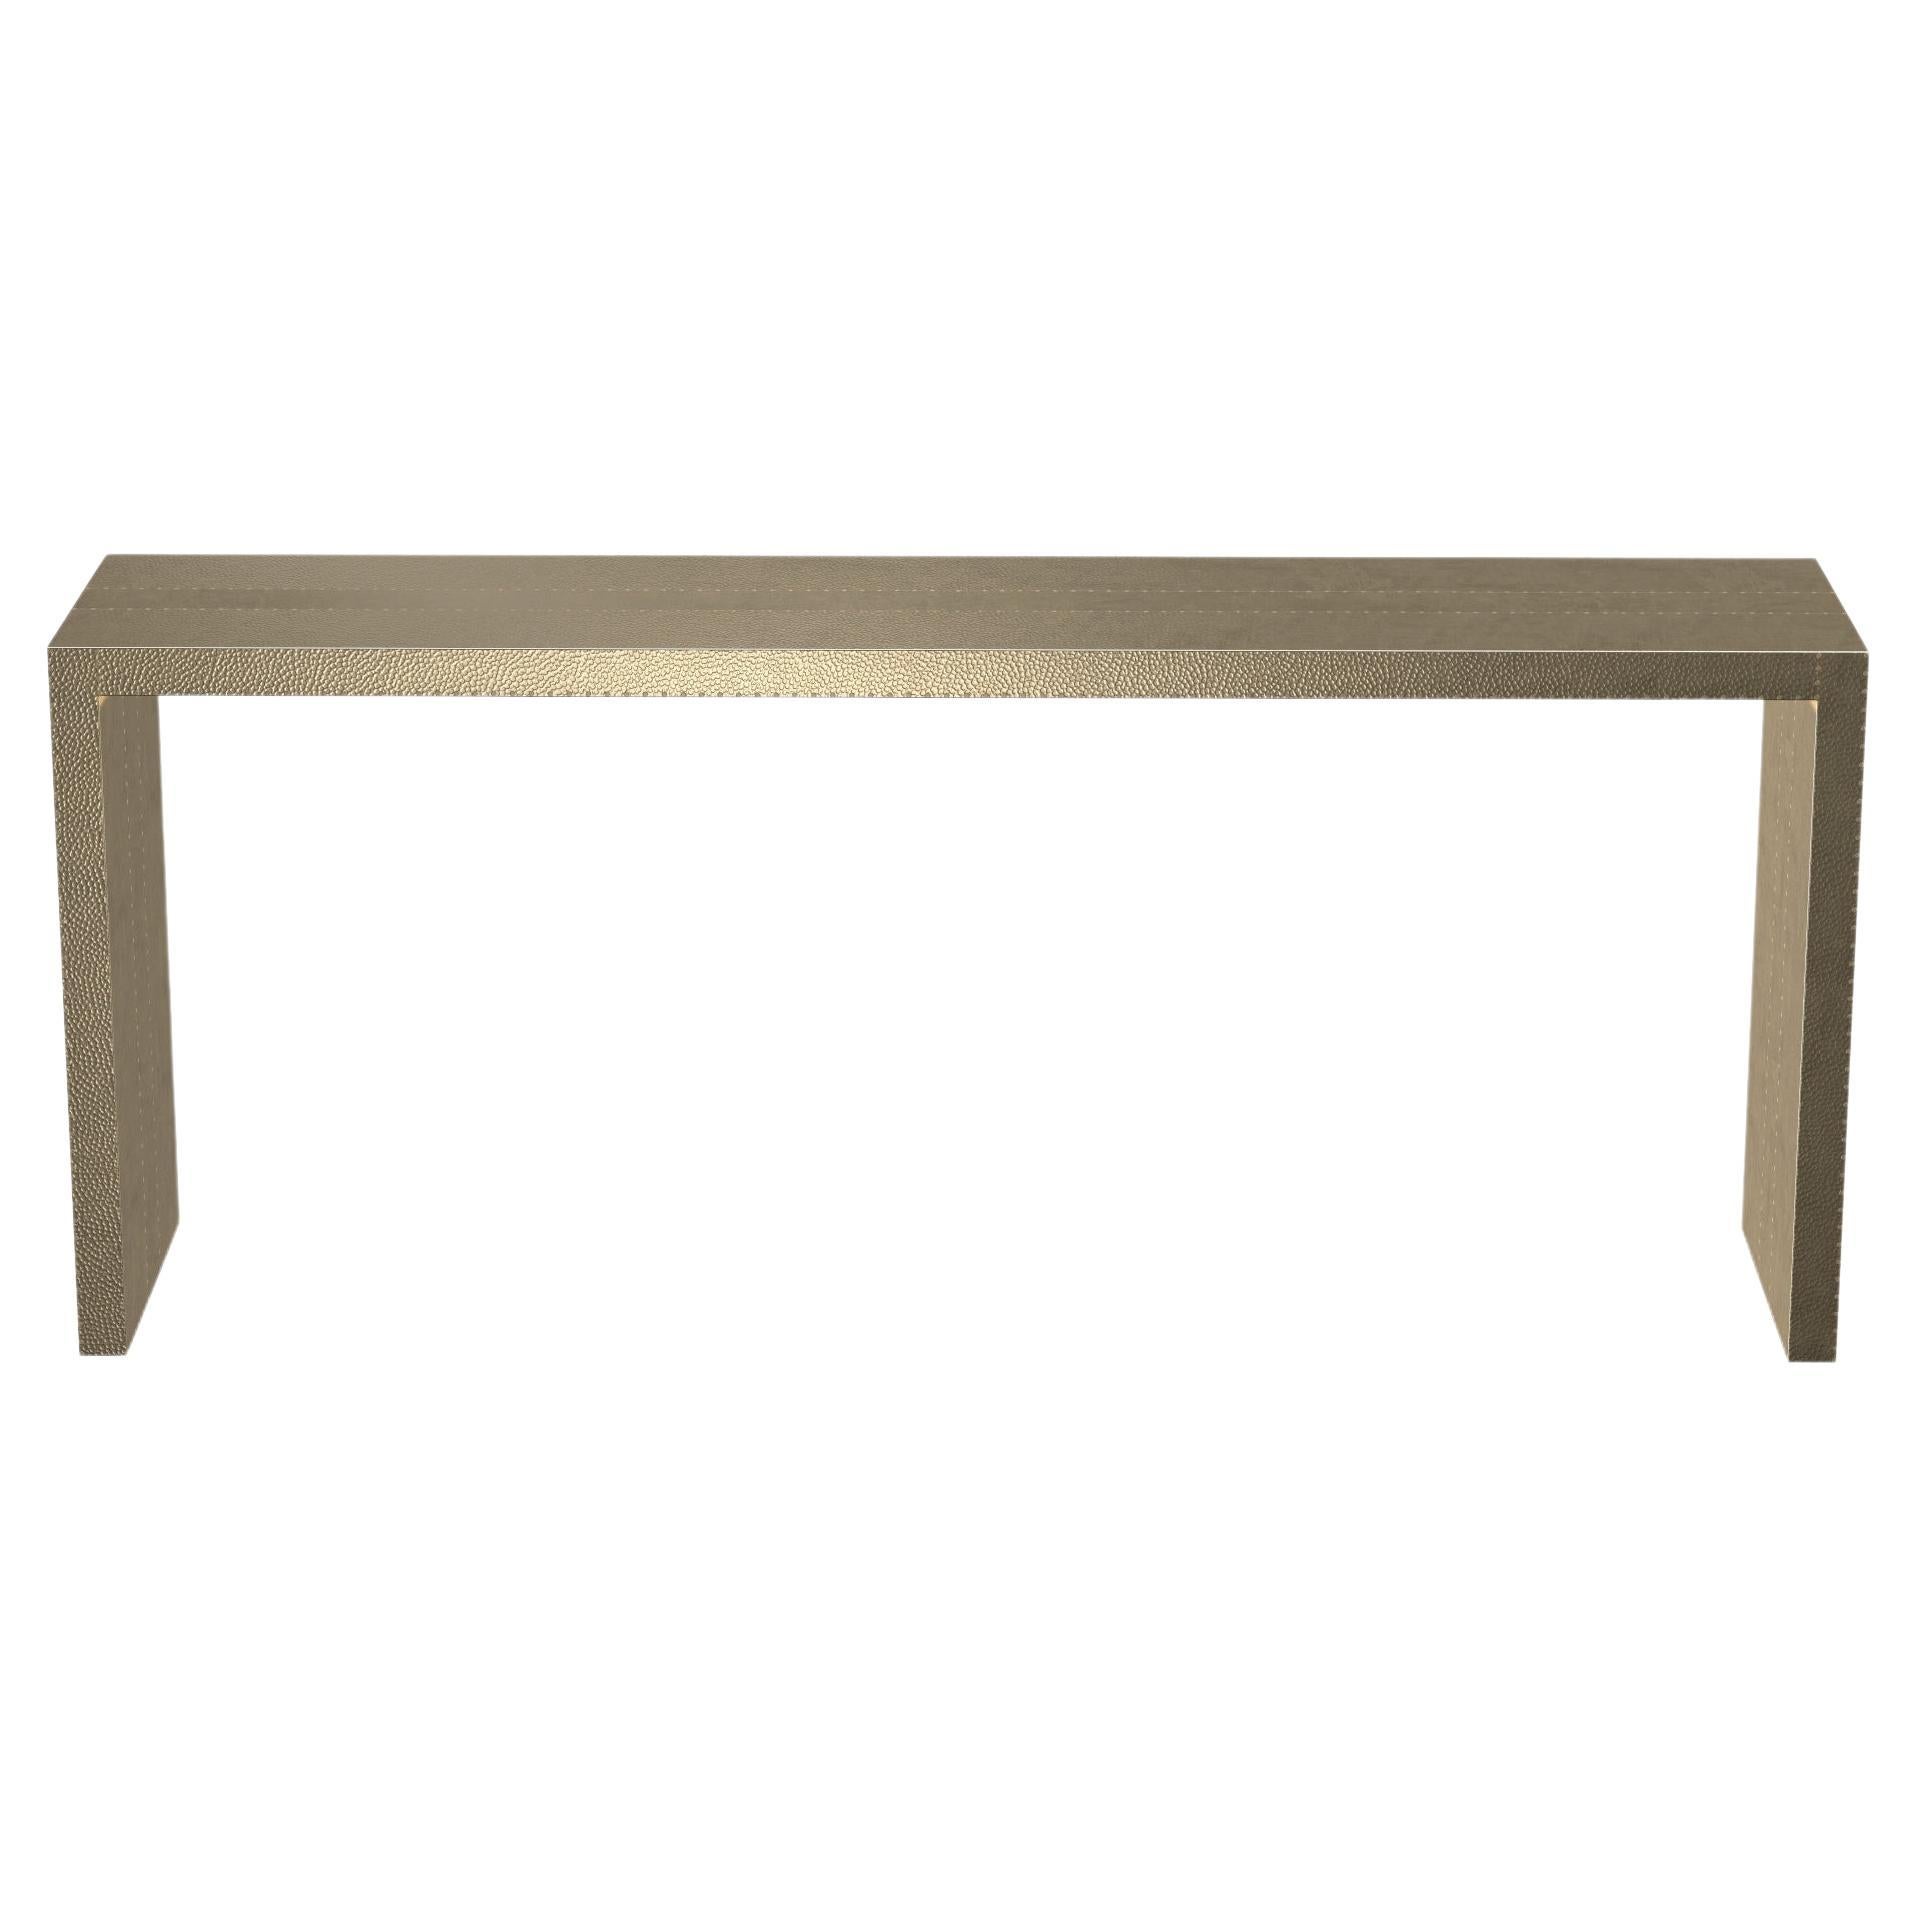 Art Deco Game Console Tables in Mid. Hammered in Brass by Alison Spear